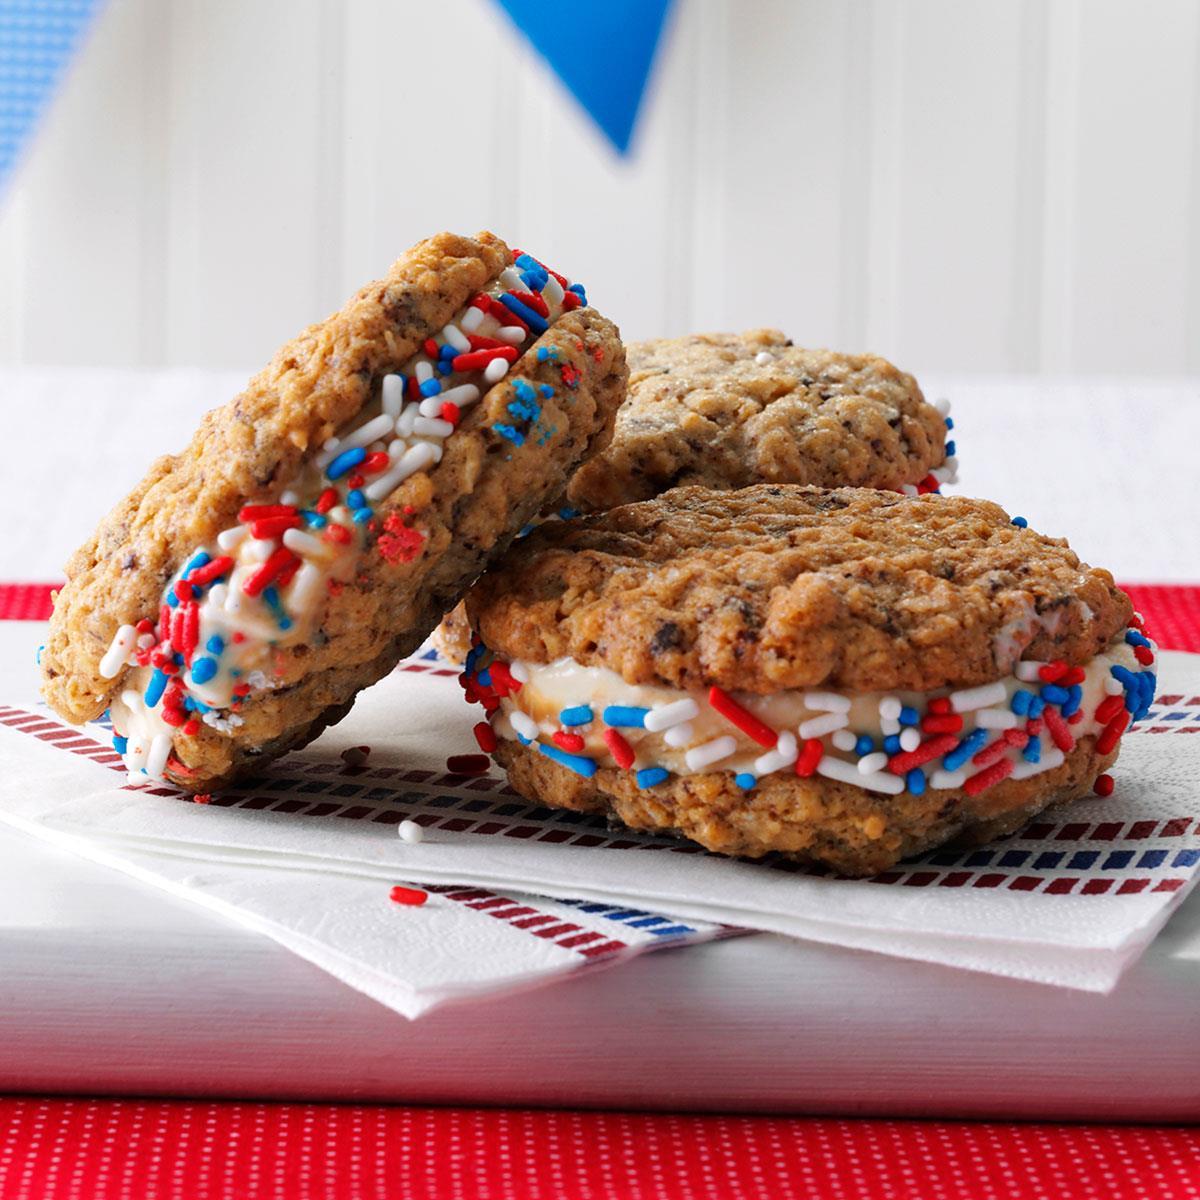 Oatmeal Cookie Ice Cream Sandwiches Recipe: How to Make It